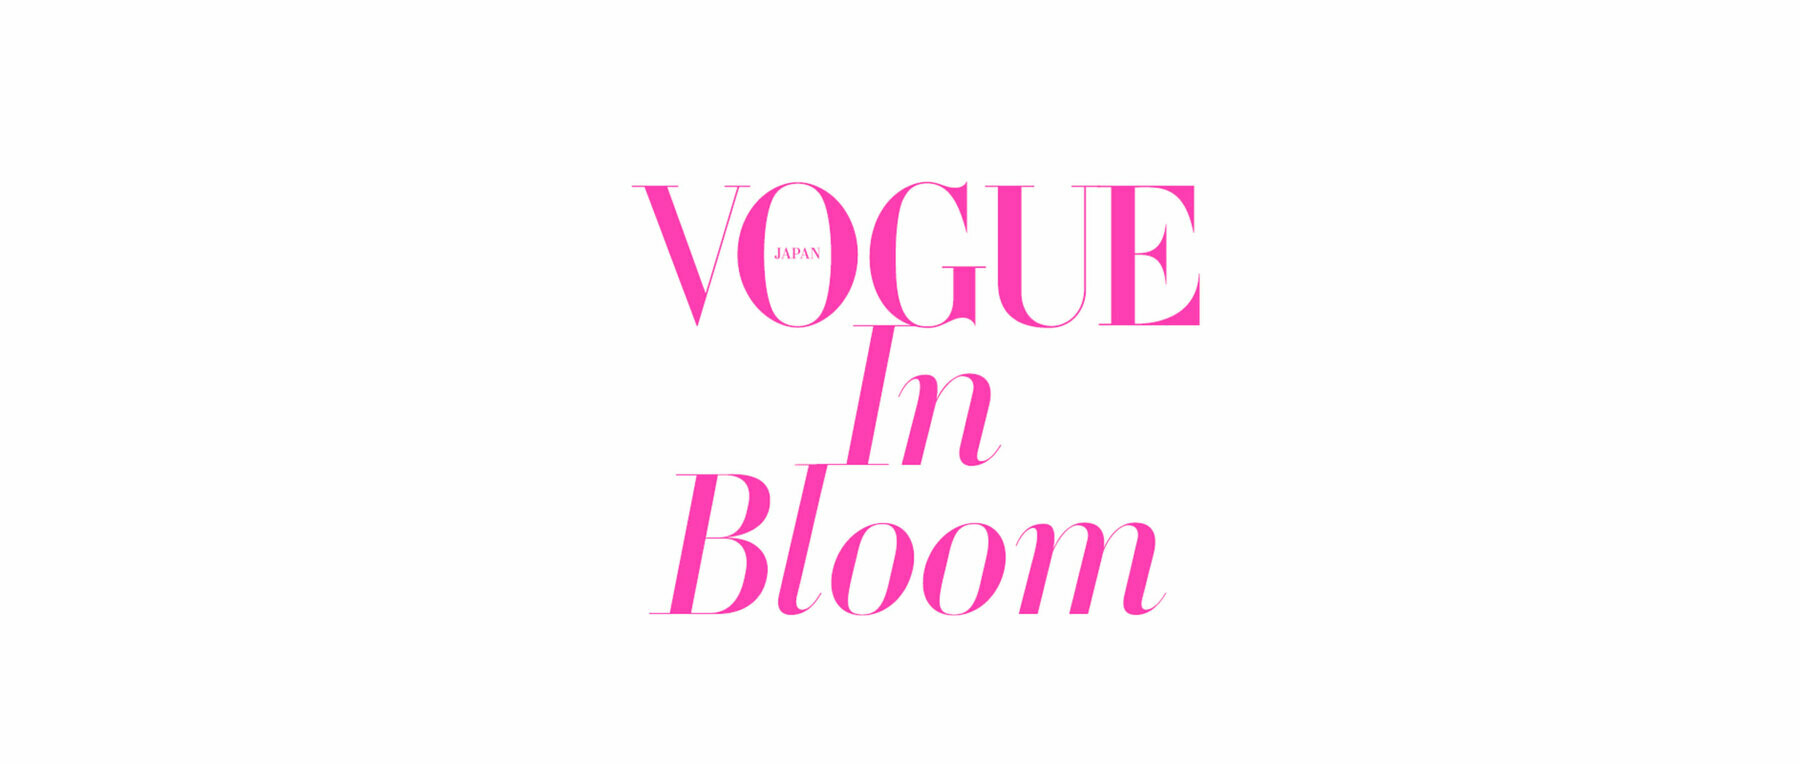 【Finished】VOGUE In Bloom's images1